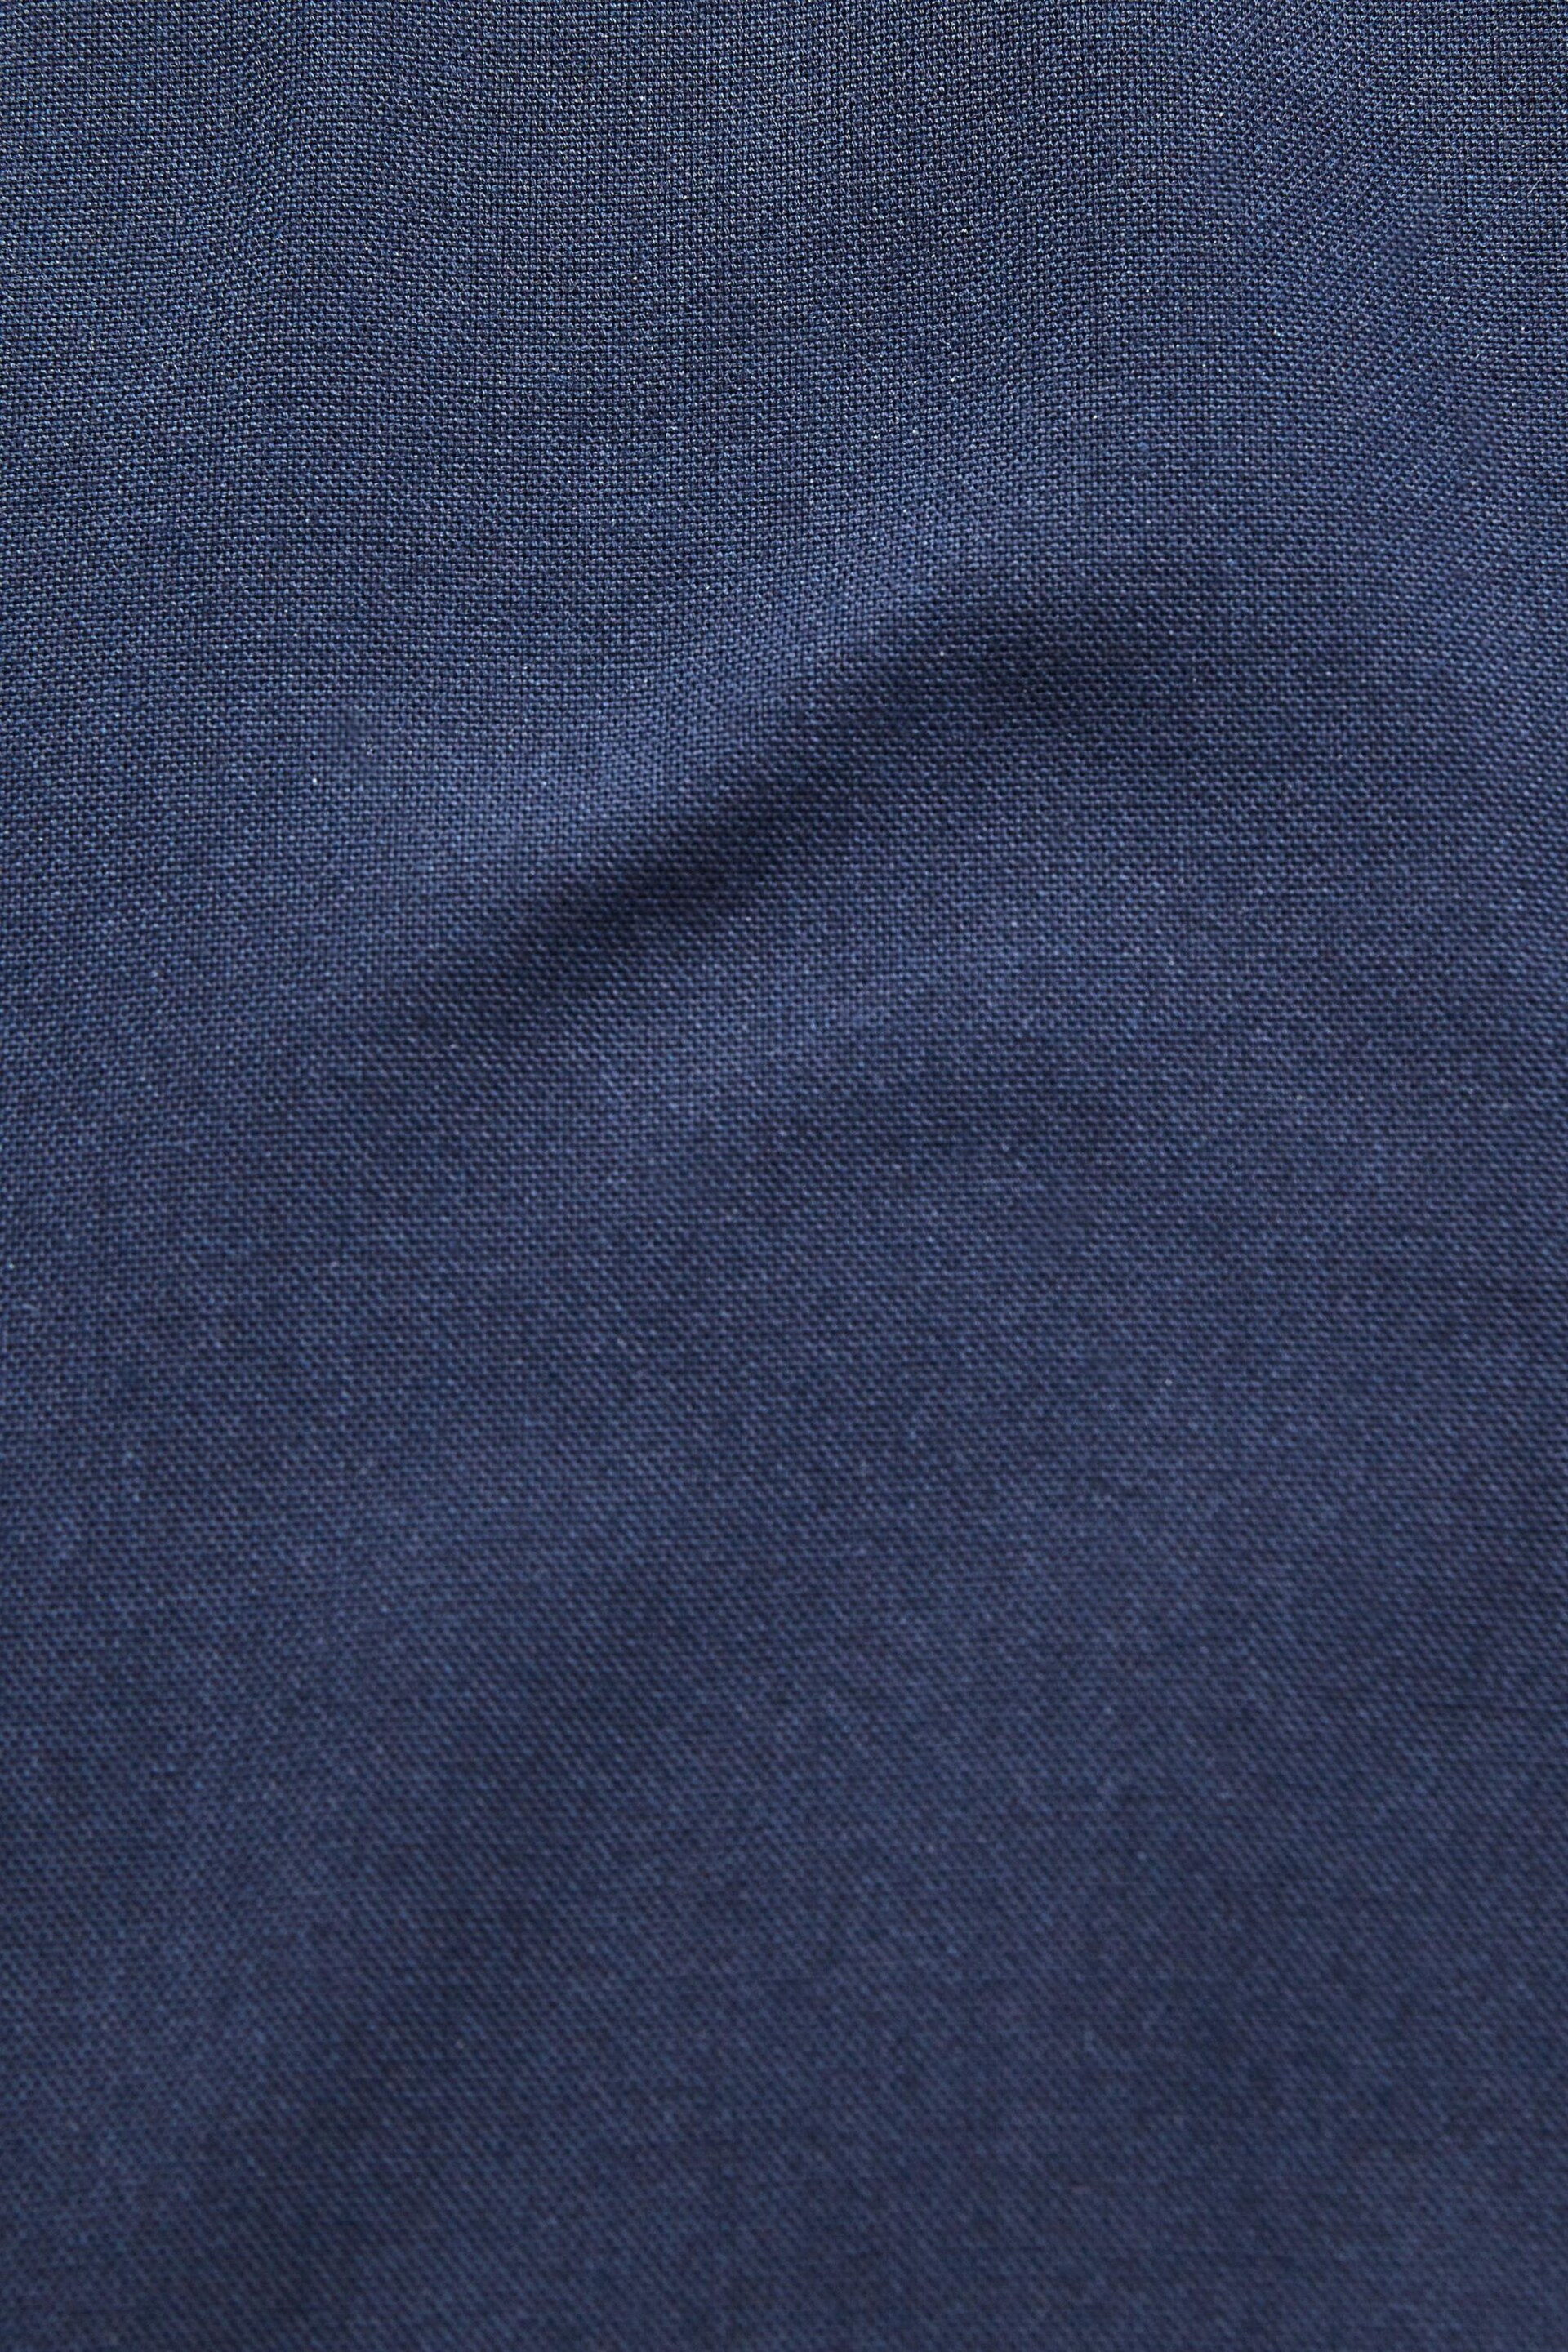 Navy Blue Easy Iron Button Down Short Sleeve Oxford Shirt - Image 7 of 7